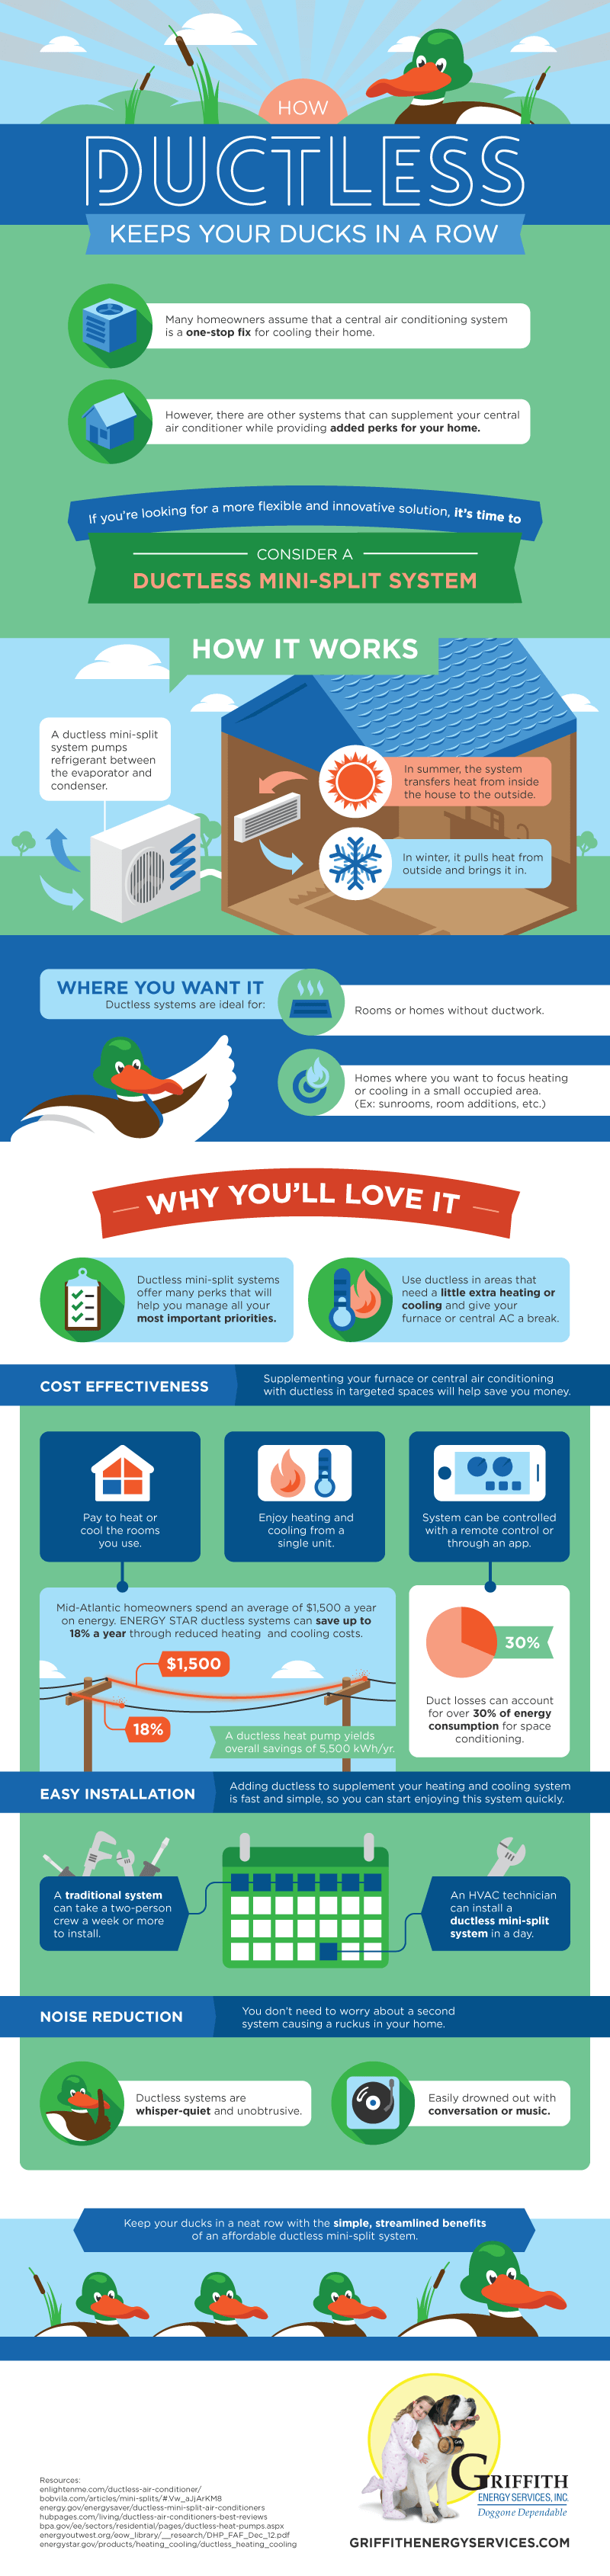 Griffith-Ductless-Air-Conditioning-Infographic